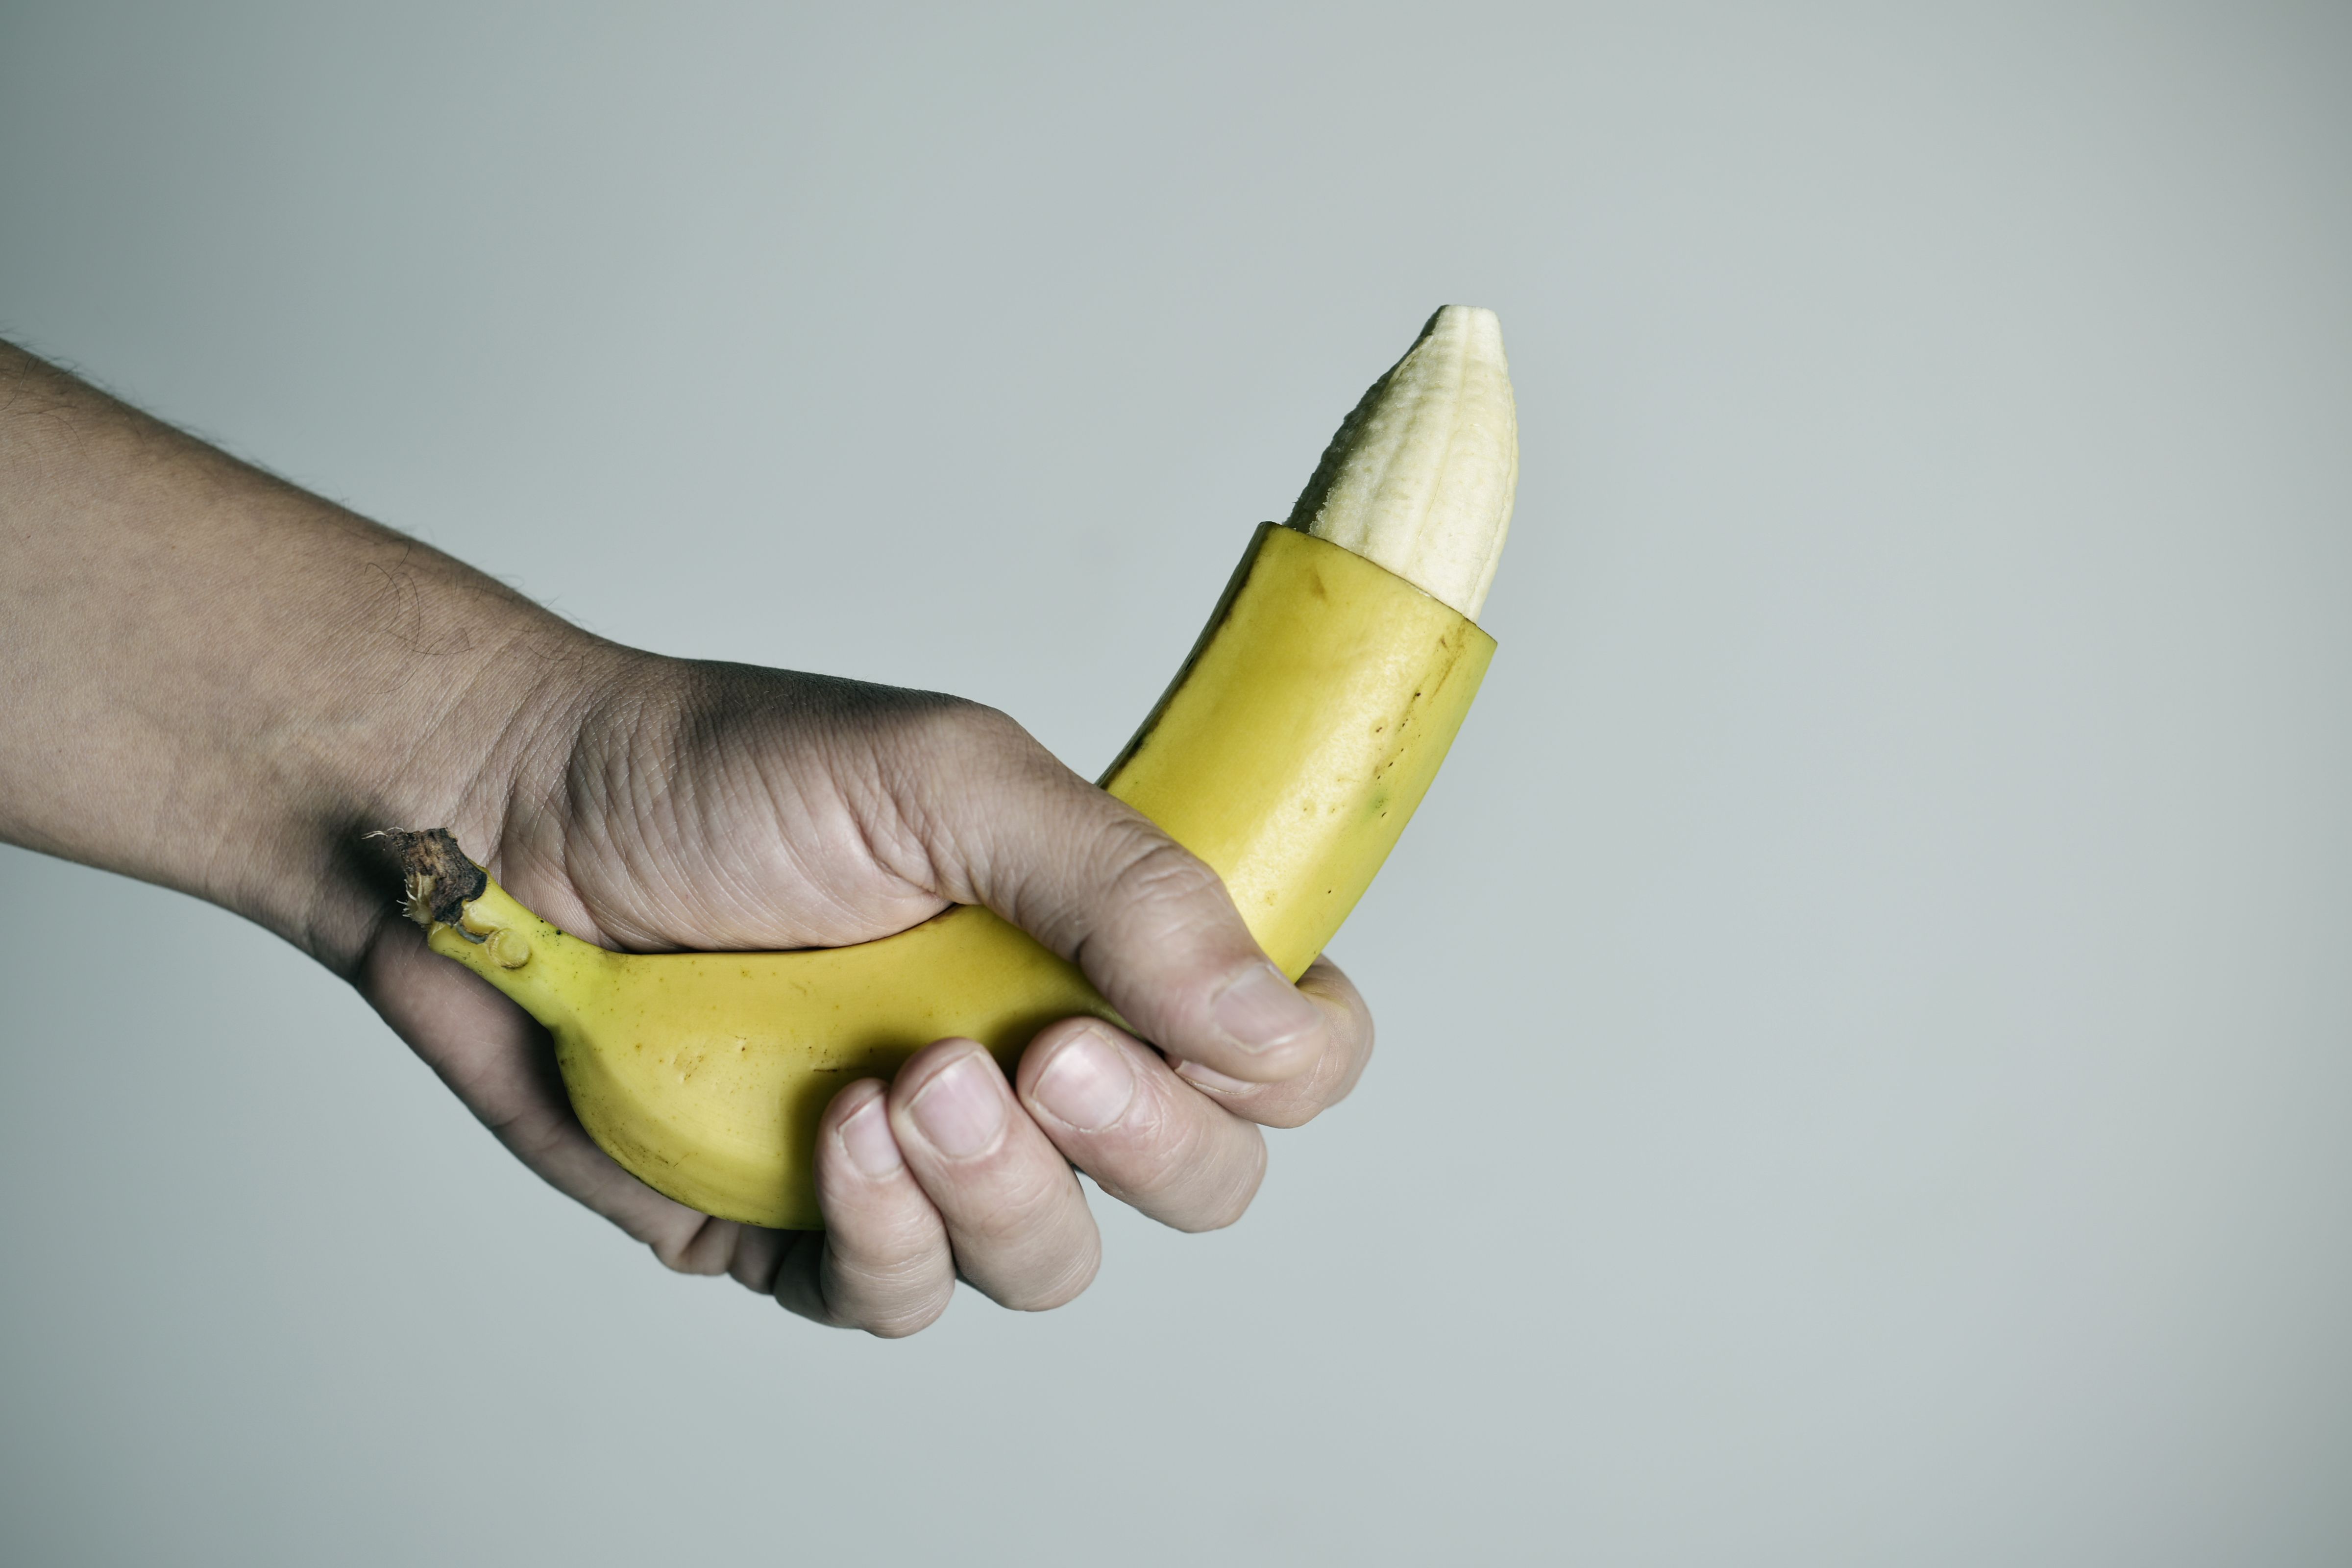 How Adult Circumcision Affects Your Sex Life According To Experts